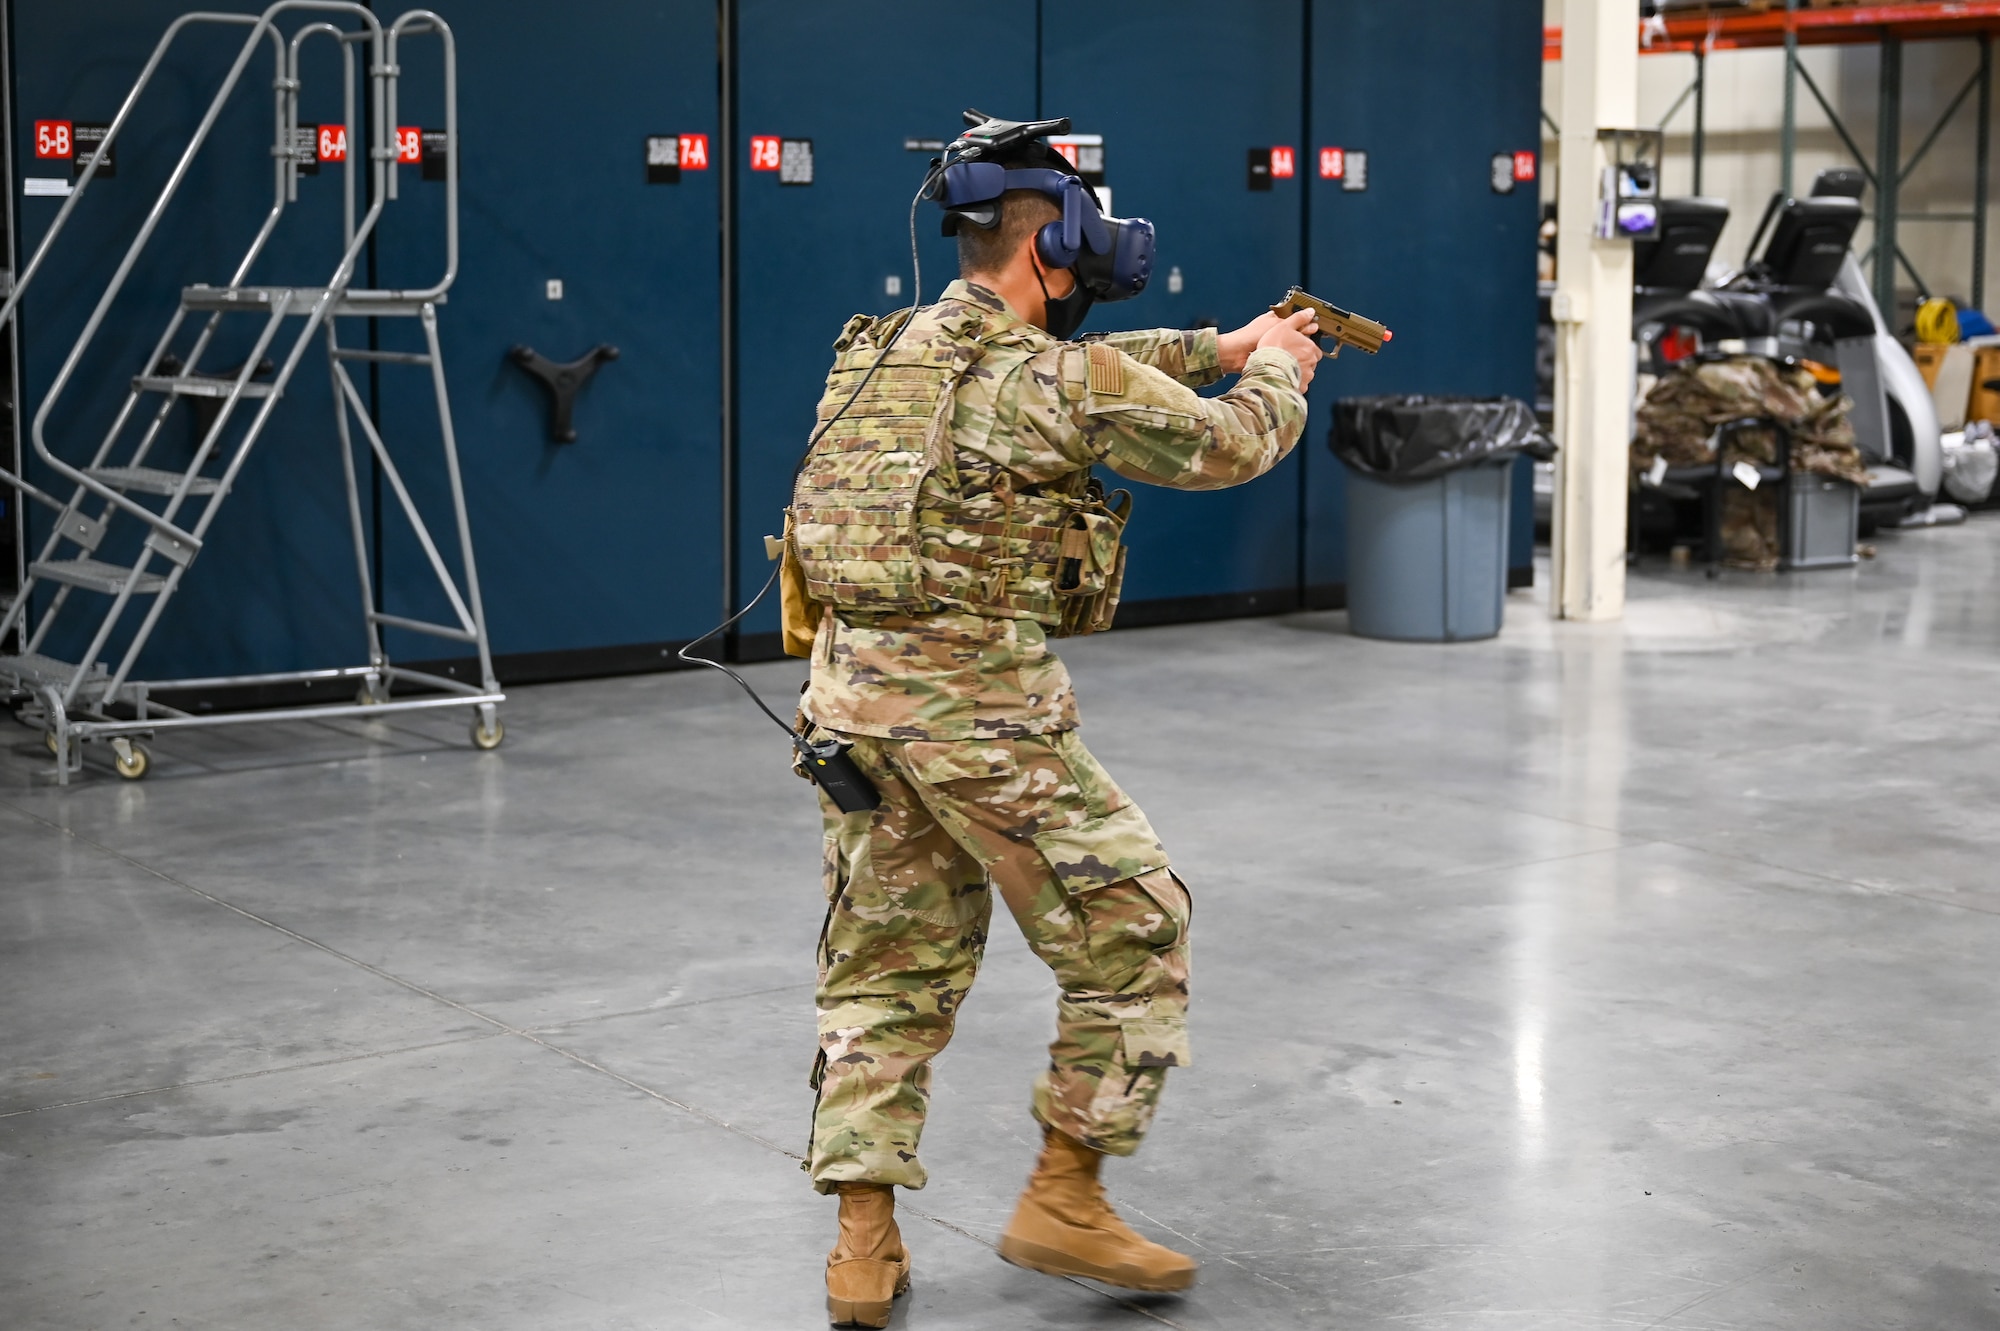 Airman 1st Class Alex Muralles, 75th Security Forces Squadron, during a use-of-force response scenario with the Street Smarts Virtual Reality system. The squadron recently implemented virtual reality to fully immerse themselves into realistic three-dimensional situations to enhance their training. (U.S. Air Force photo by Cynthia Griggs)